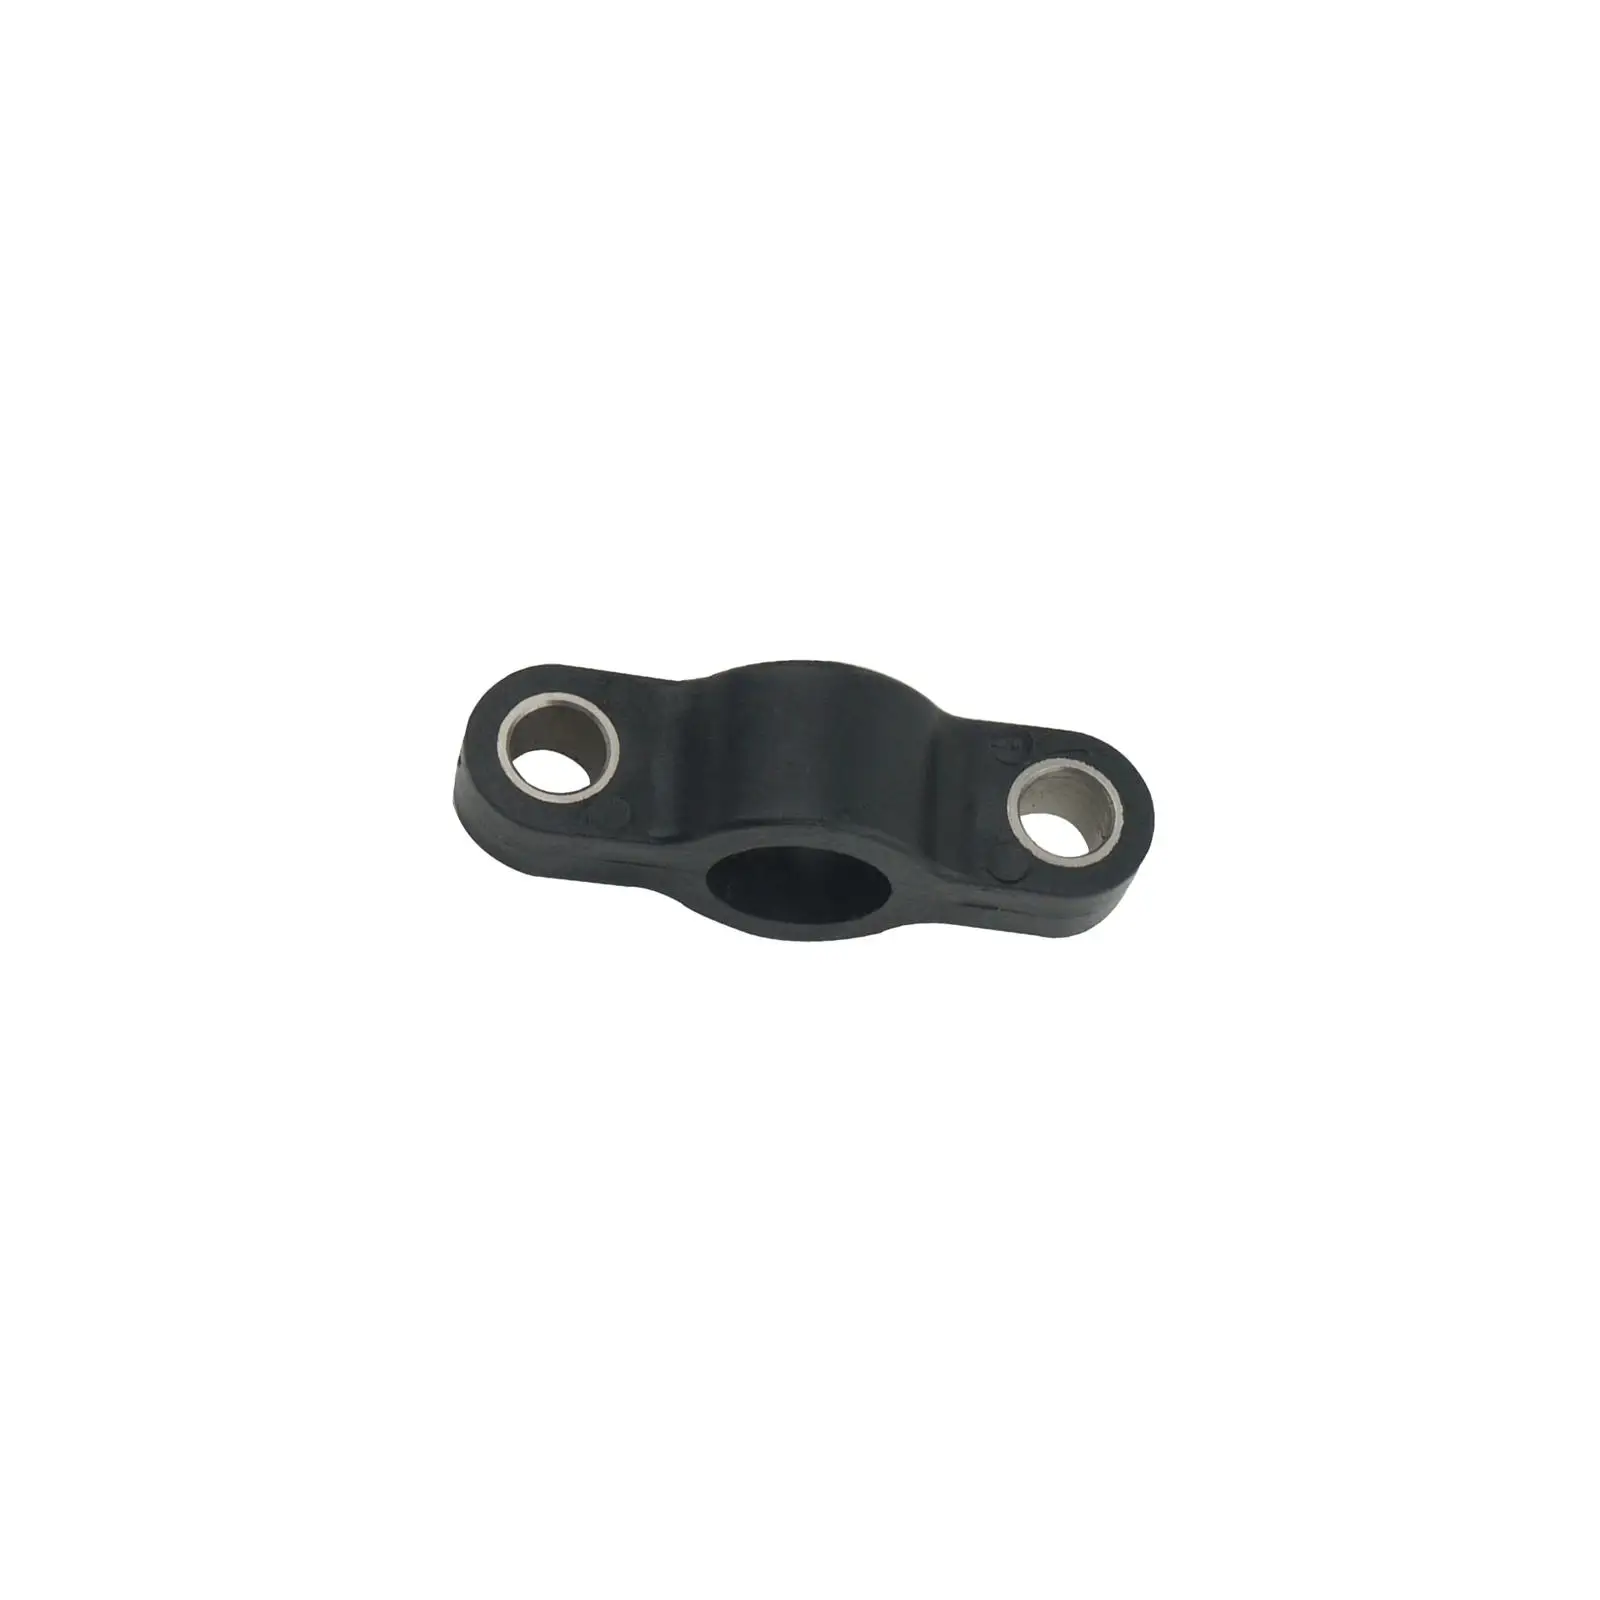 Nylon Bracket 6F5-41662 F15-05040002 for Parsun Engine Stable Performance Boat Repairing Accessory Replacement Black